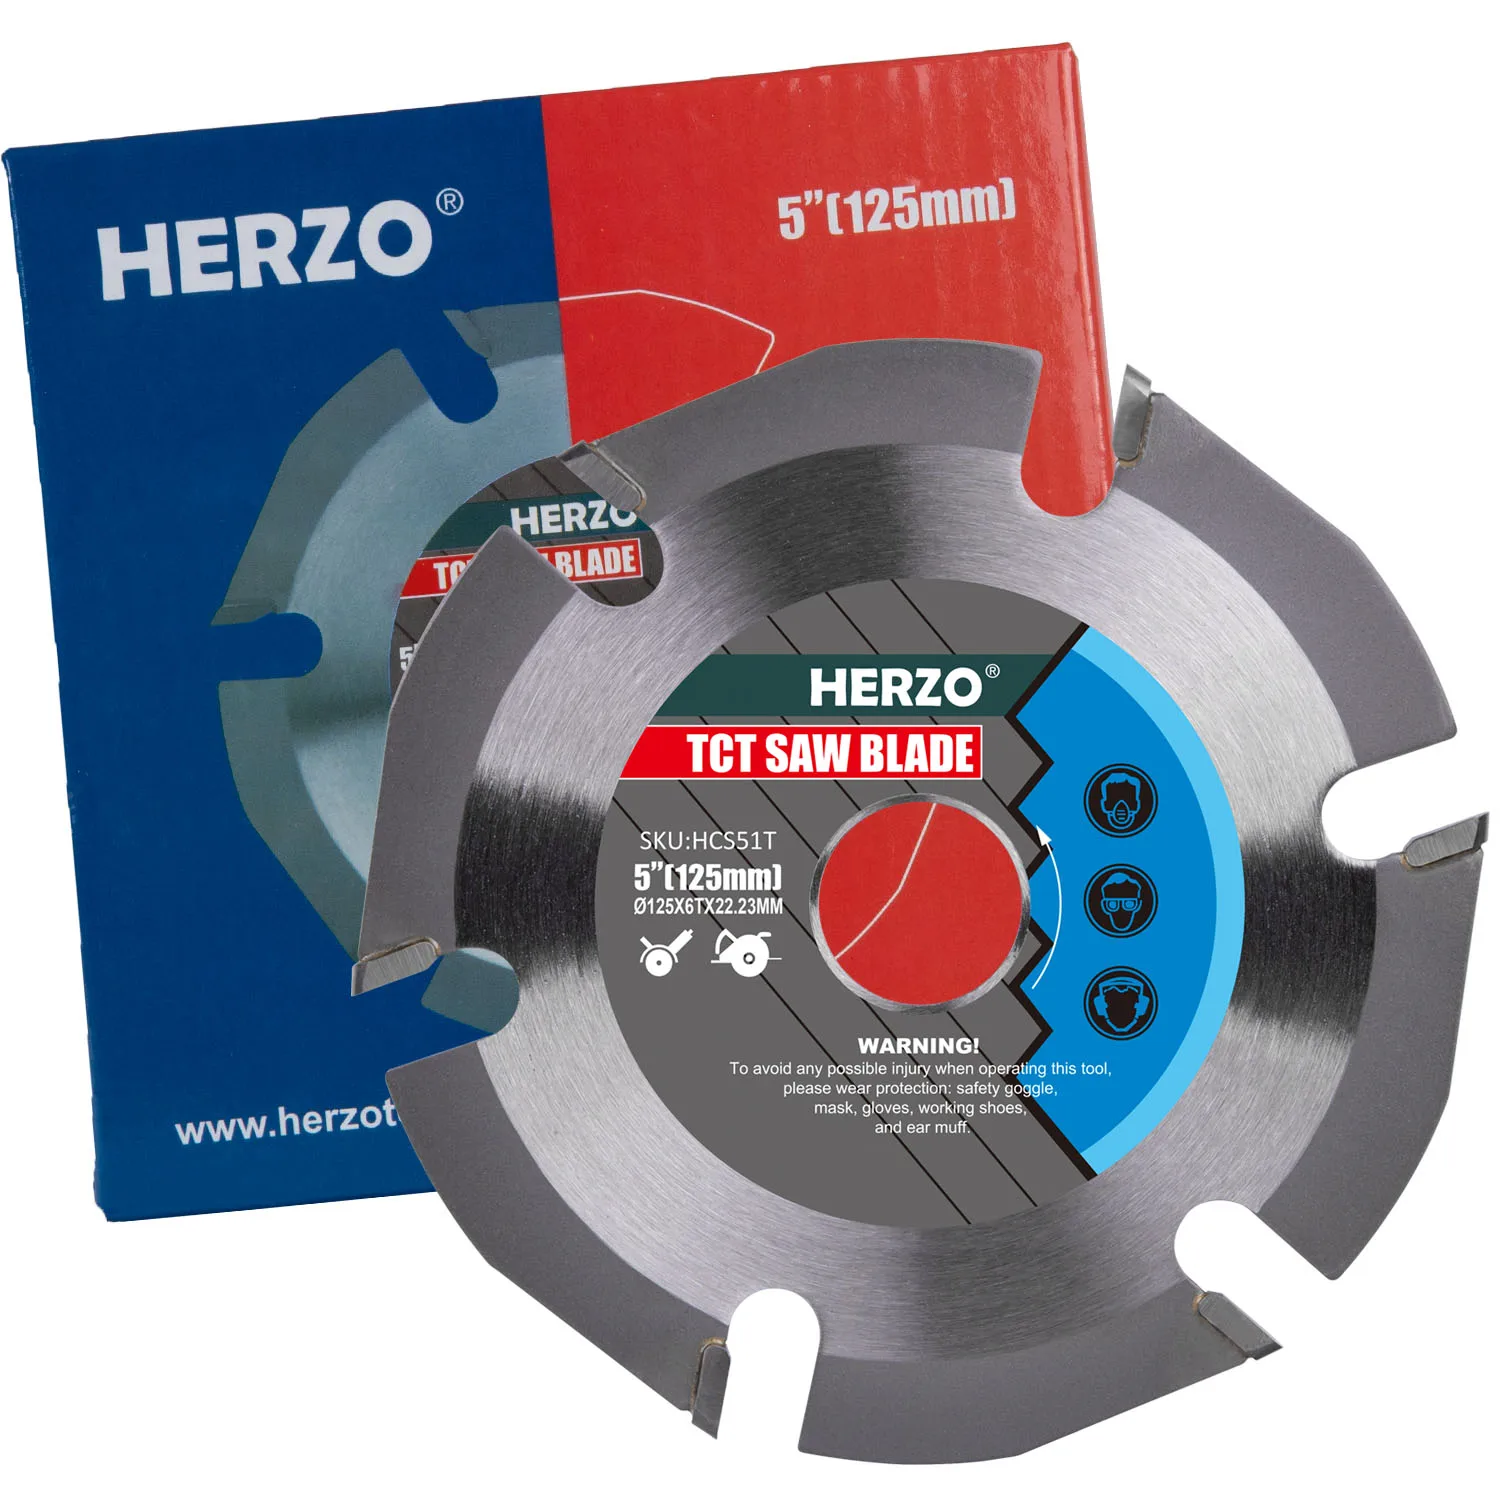 HERZO HCS5.1T 125mm 6 Teeth Angle Grinder Saw Carbide Tipped Cutting Blade enlarge